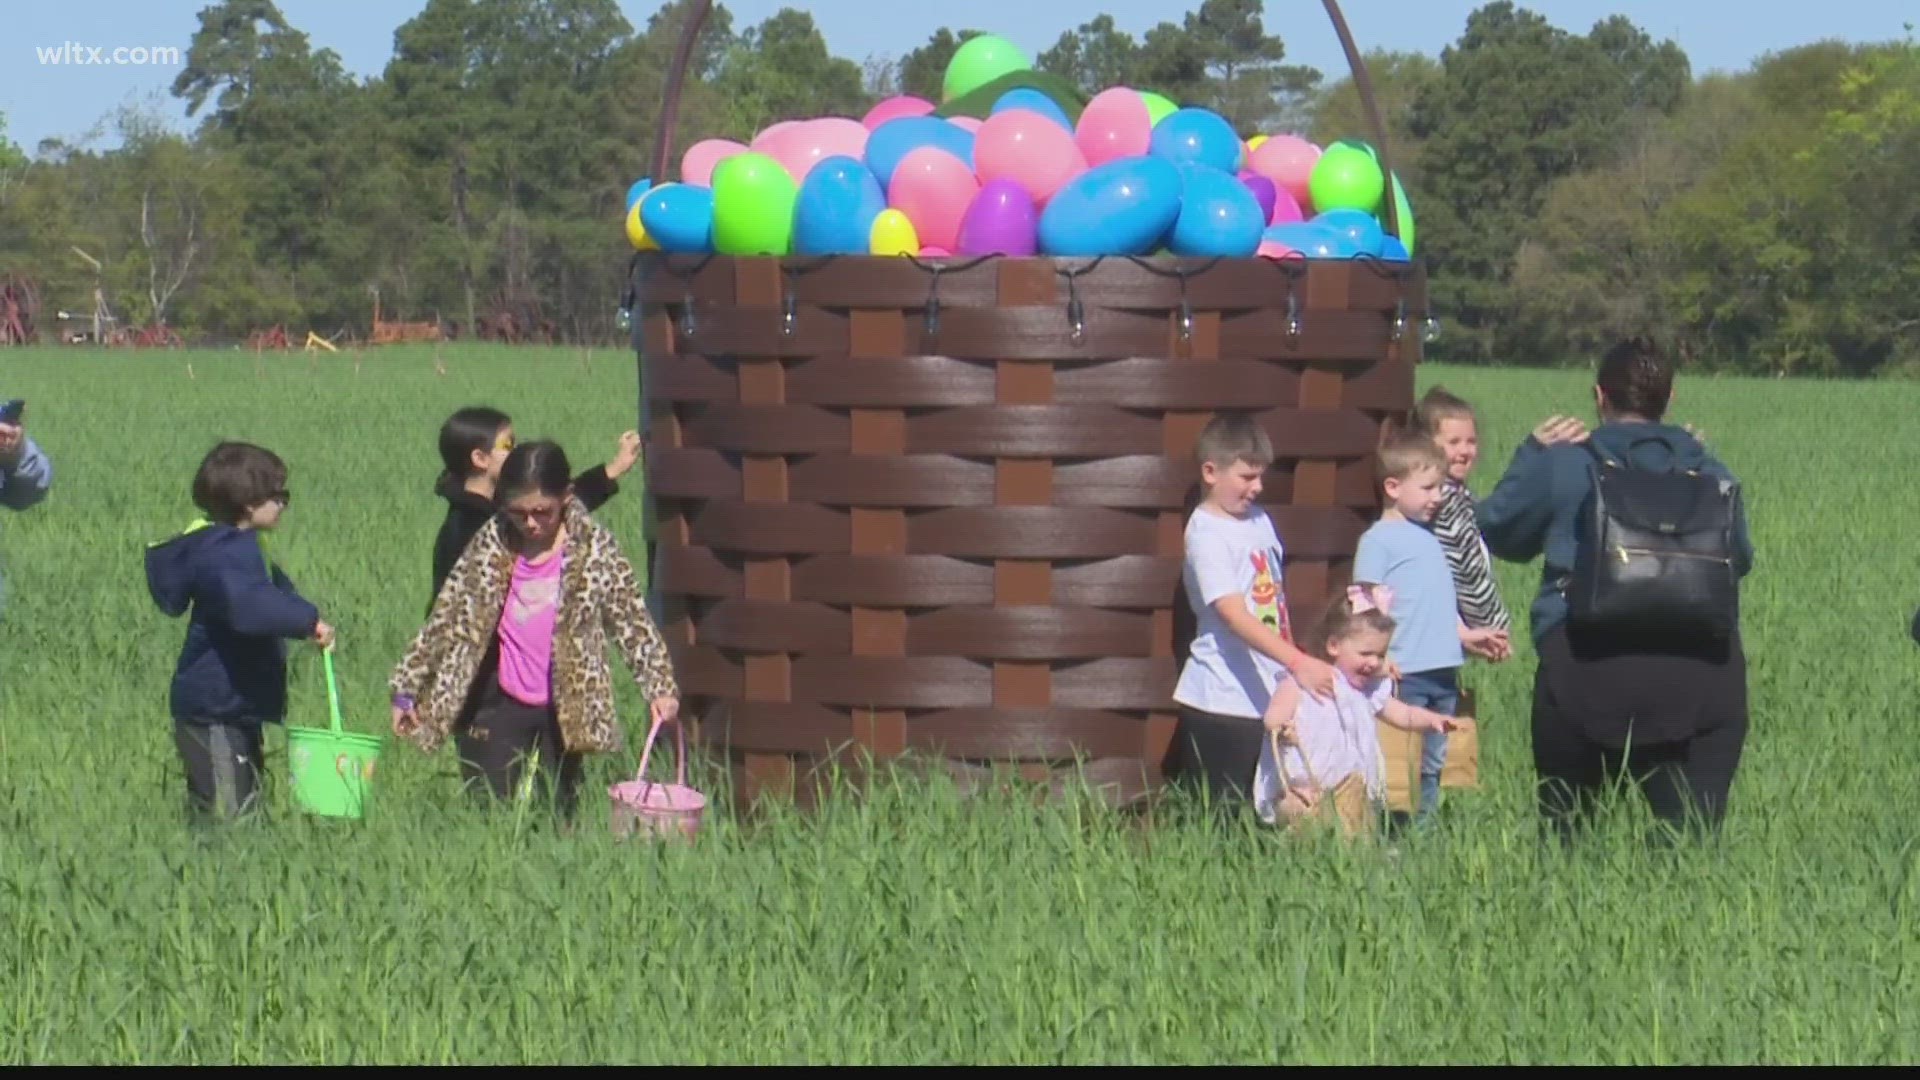 In Lexington, Easter came a few days earlier for hundreds of kids at Clinton Sease Farms.